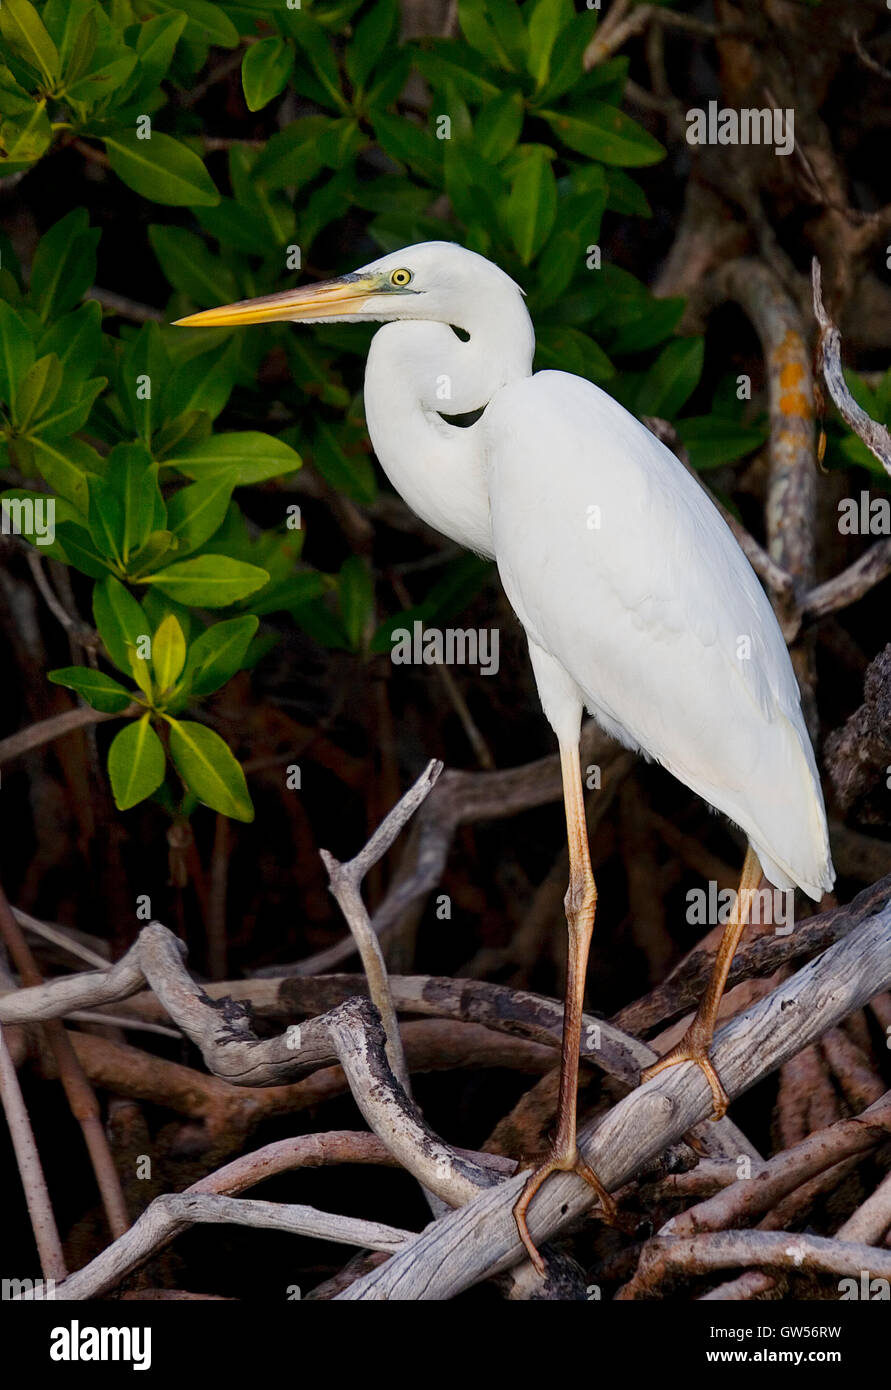 An elegant young Great White Heron perches amid mangrove prop roots along Key Largo Sound, Pennecamp, Florida Keys Stock Photo